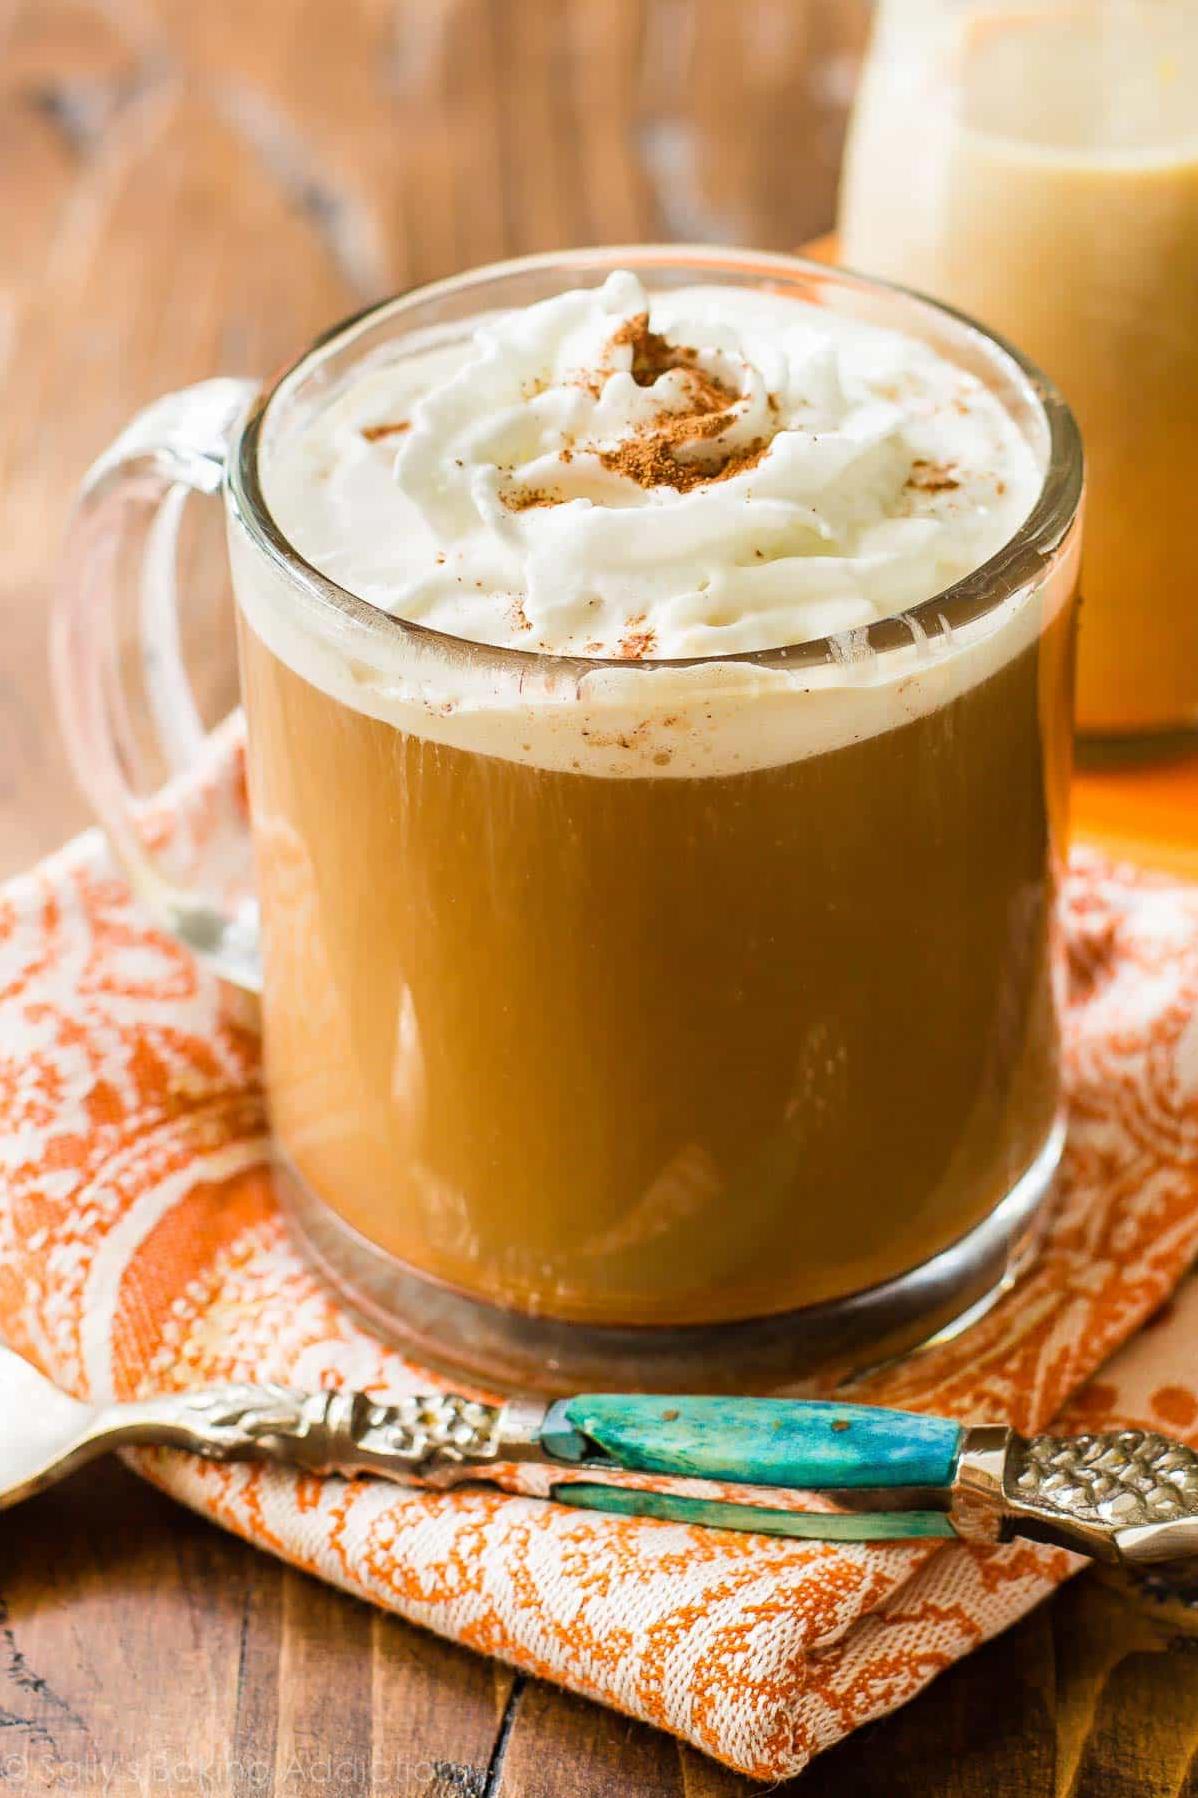  Indulge in a cozy cup of pumpkin goodness.